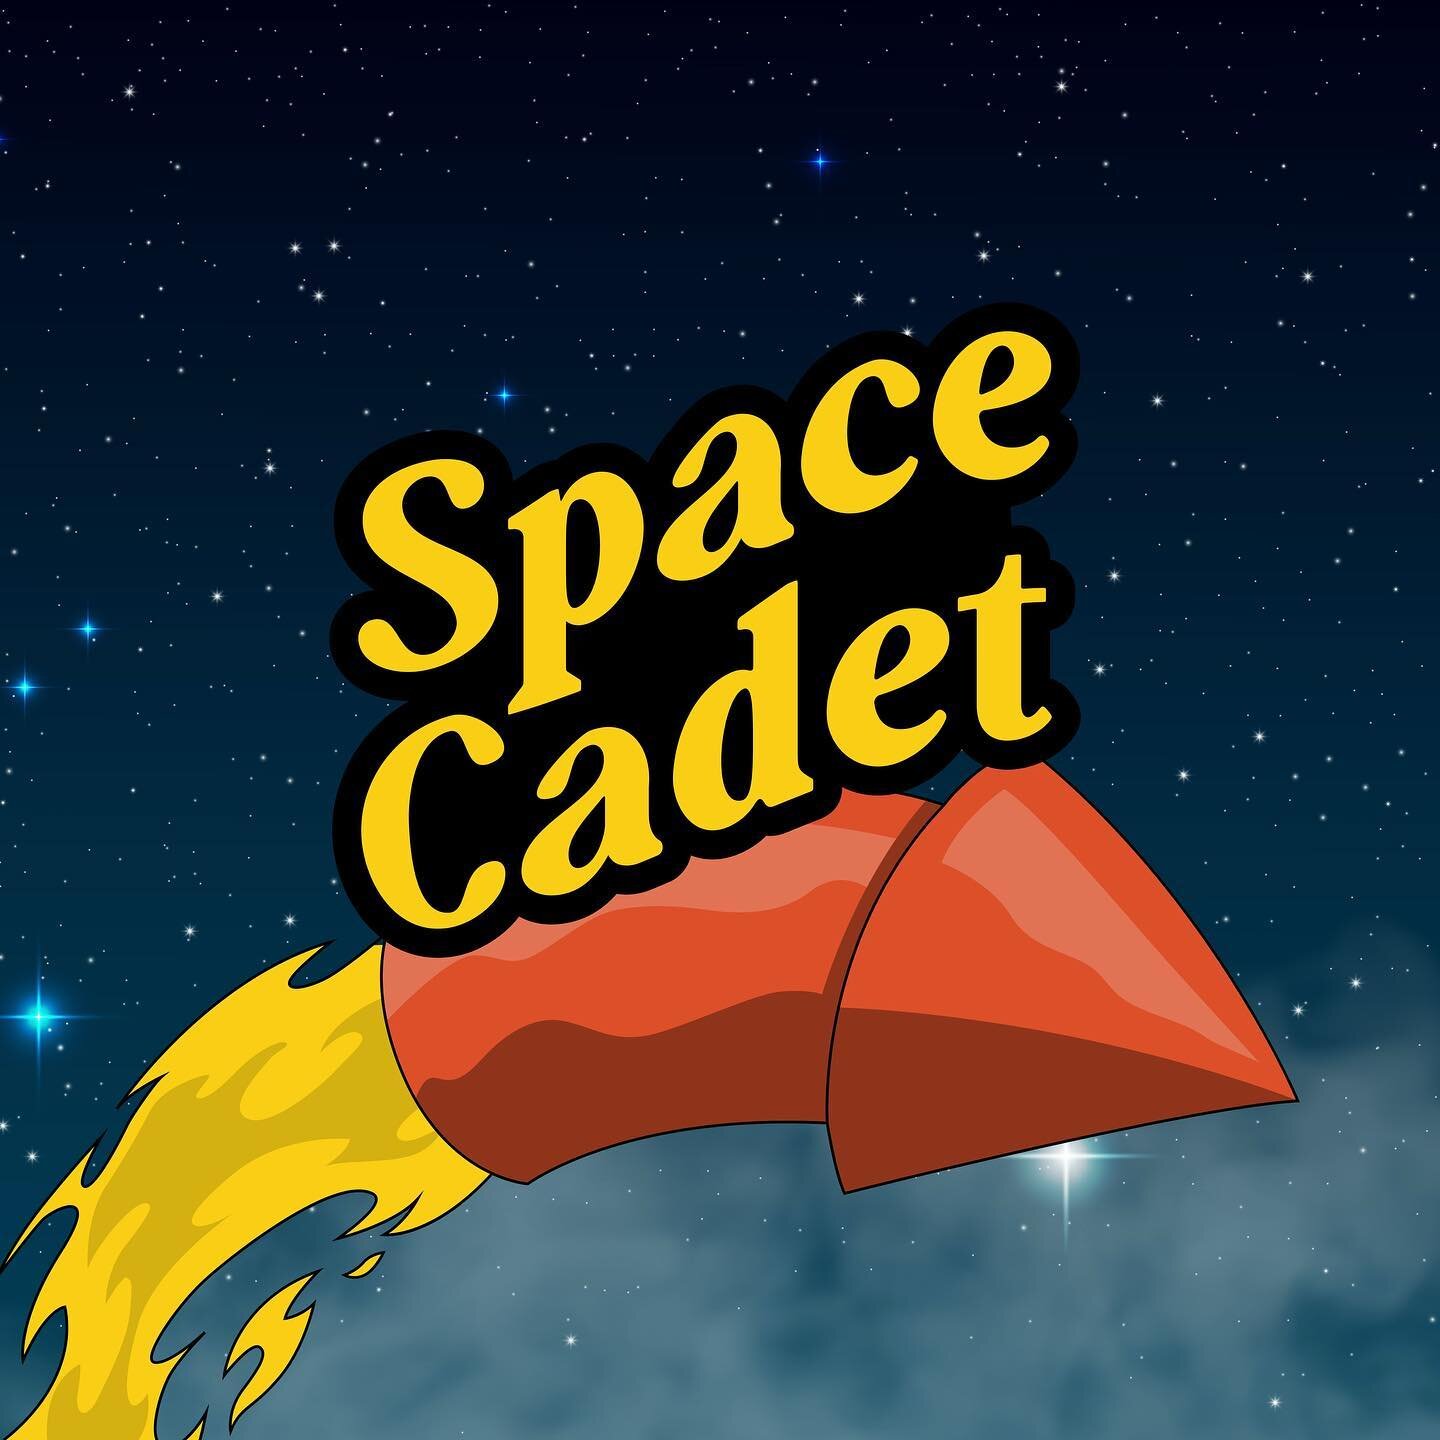 Prepare for takeoff! 🚀

Space Cadet

Space Cadet is a brew that will send your taste buds into orbit! This New England-style hazy IPA is like sipping a tropical paradise, with juicy bursts of flavors like a meteor shower. With a hazy golden appearan